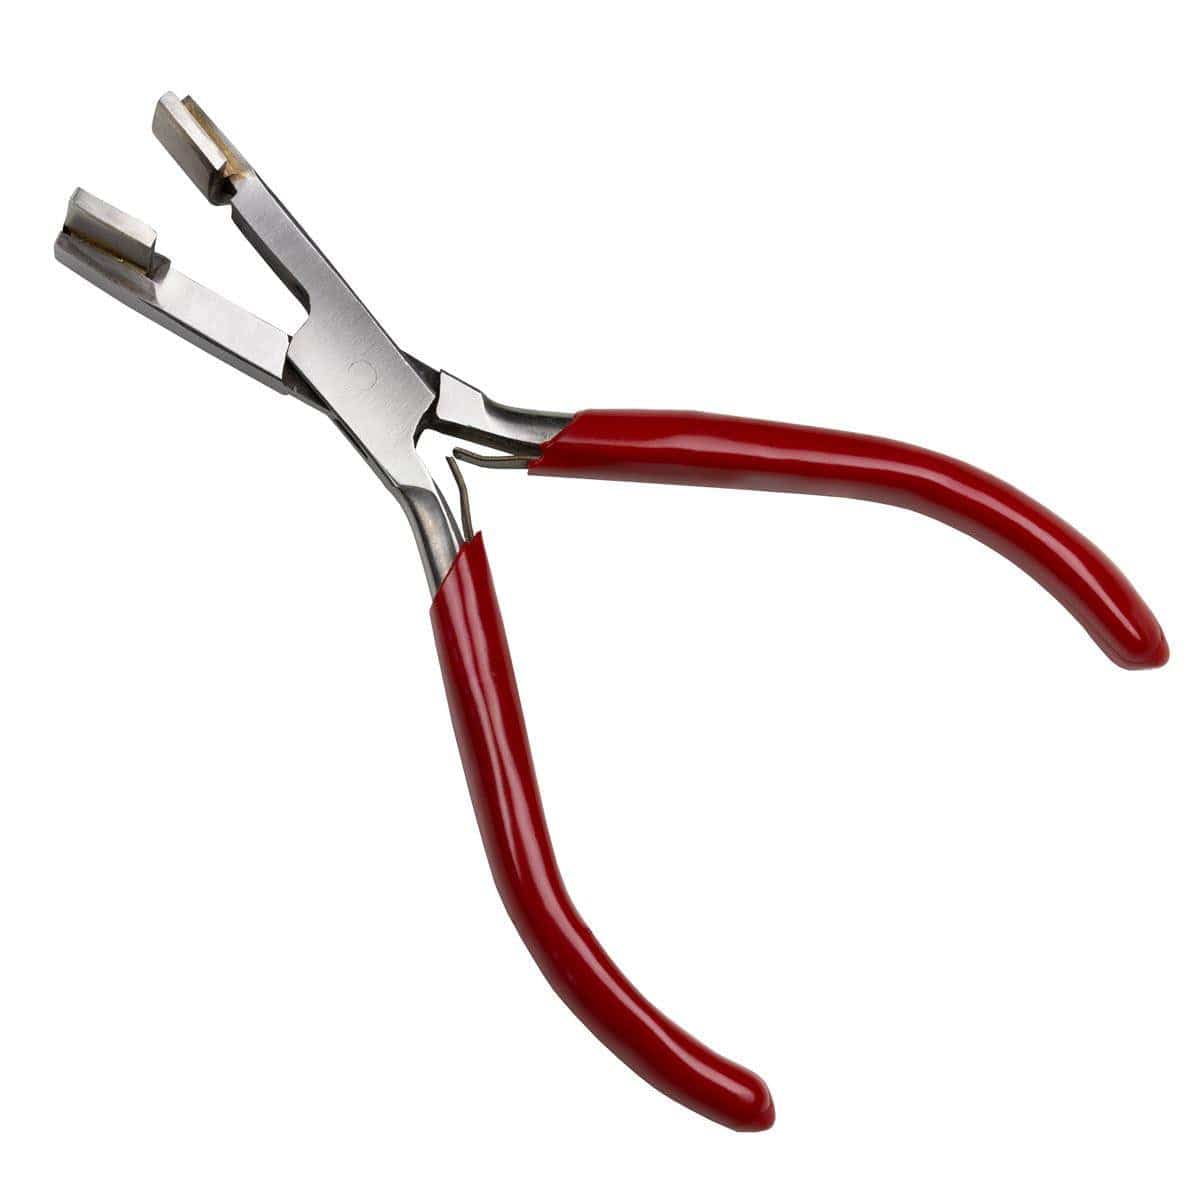 Pliers for Curving Spring Bars